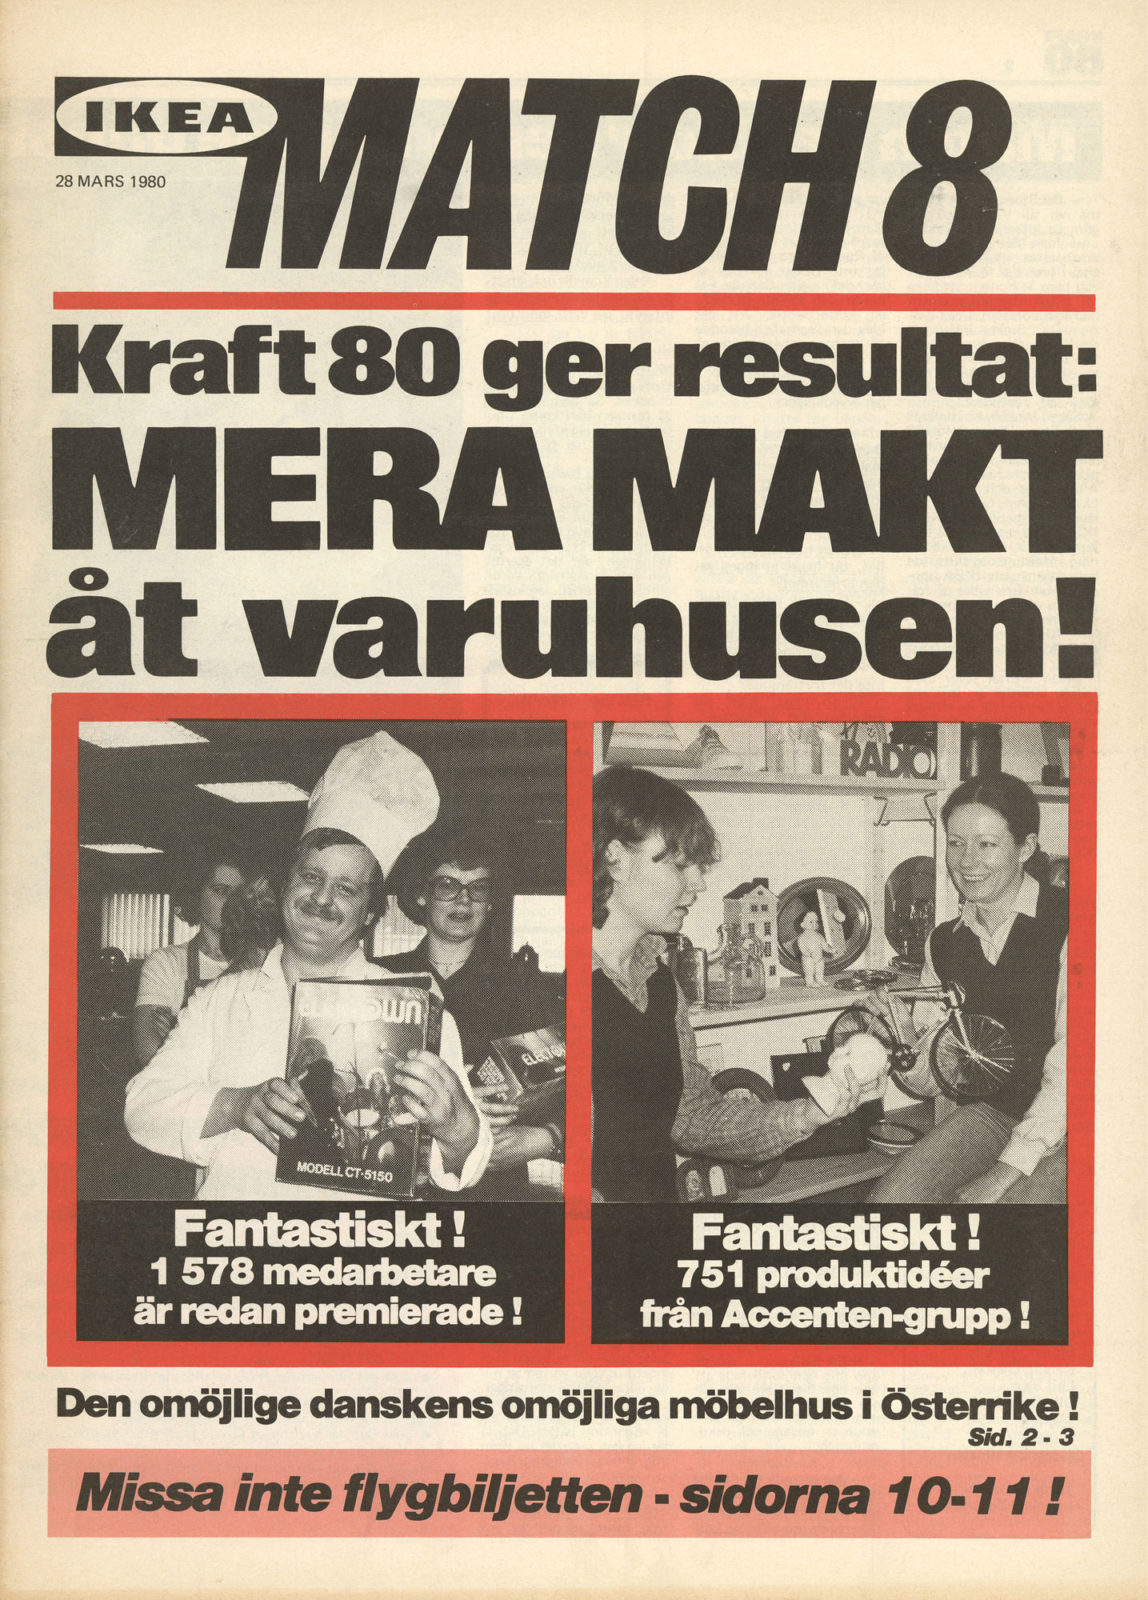 Cover of the internal IKEA tabloid with pictures of staff and headline 